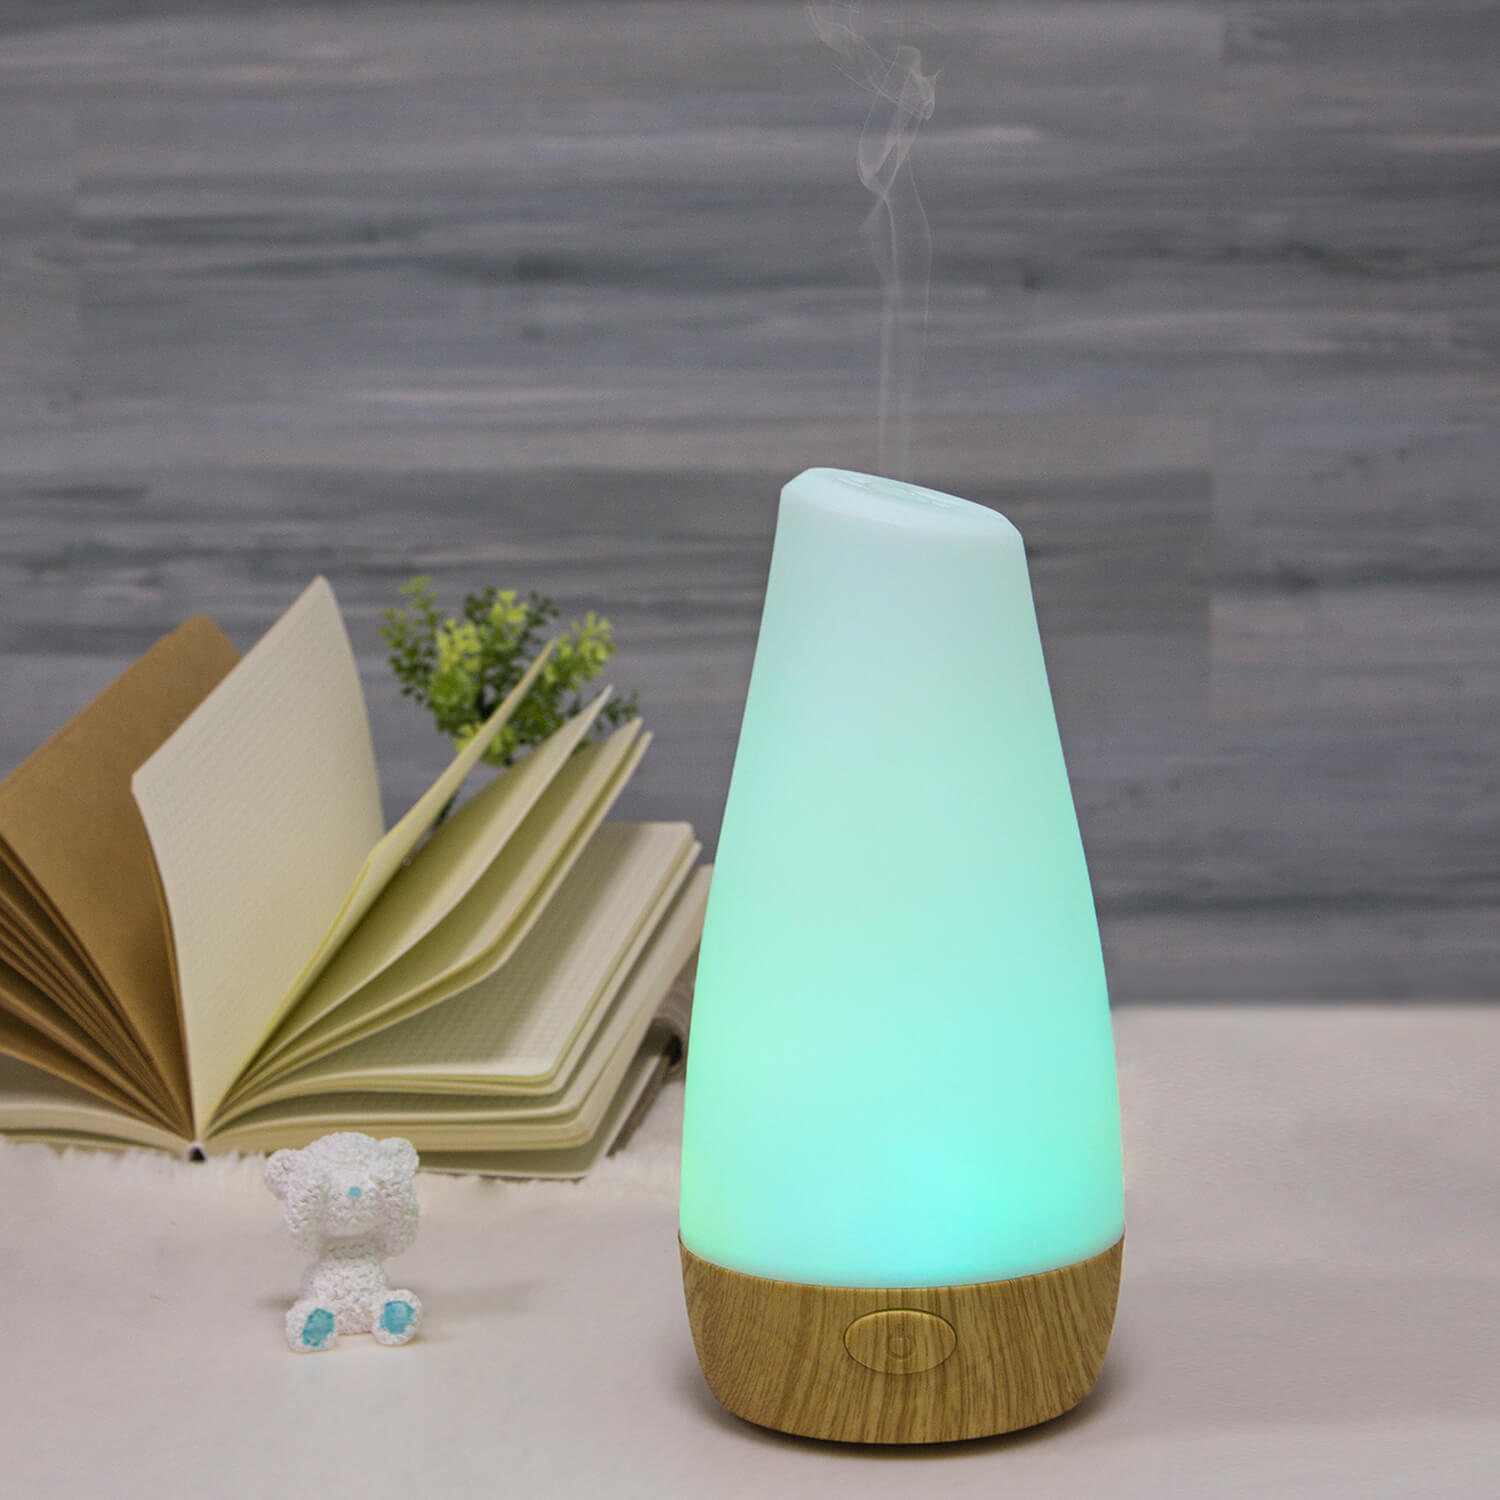 Aeromatic Ultrasonic Aroma Diffuser Wooden Effect Home Store + More